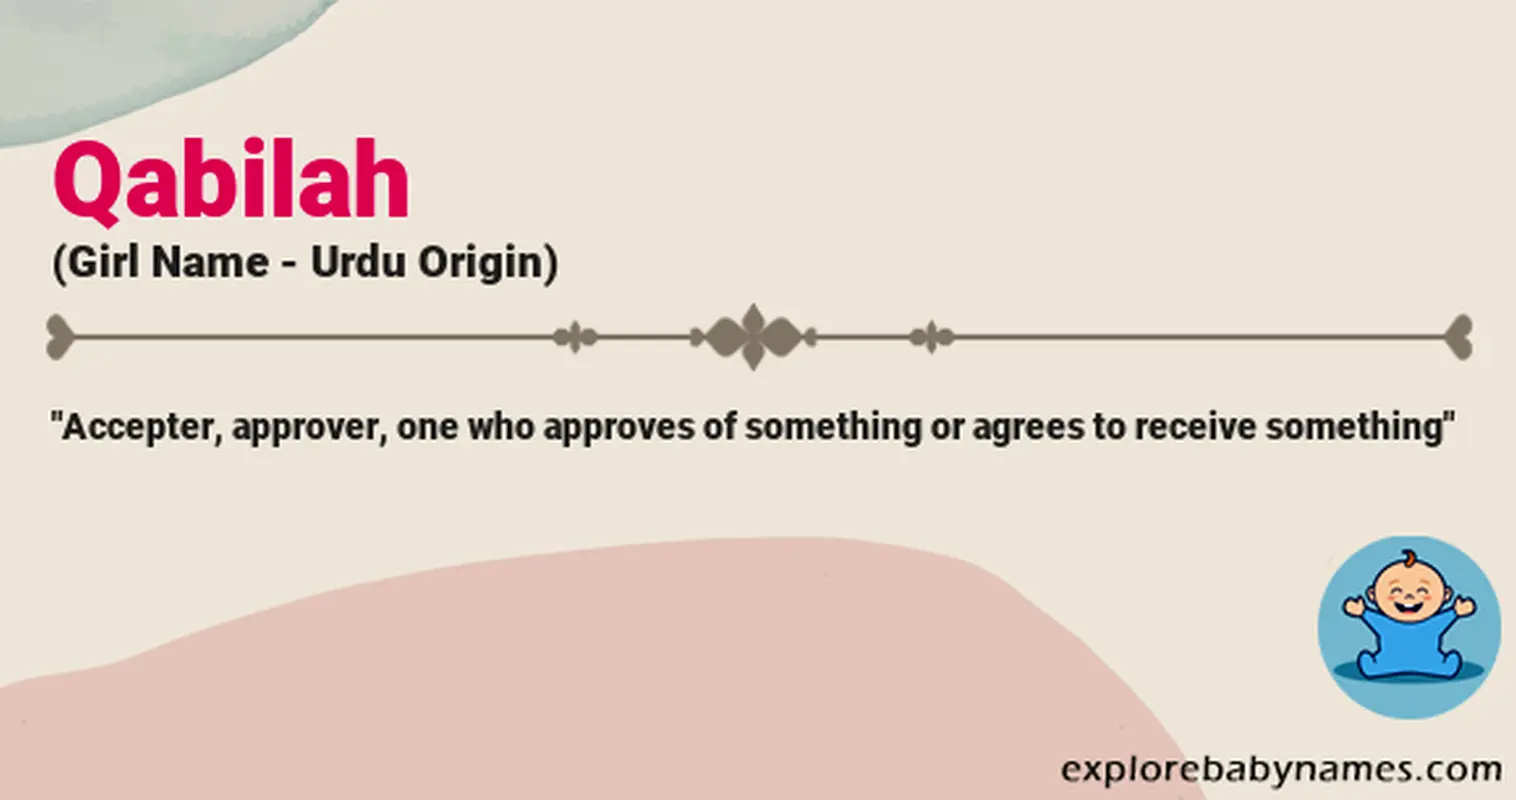 Meaning of Qabilah